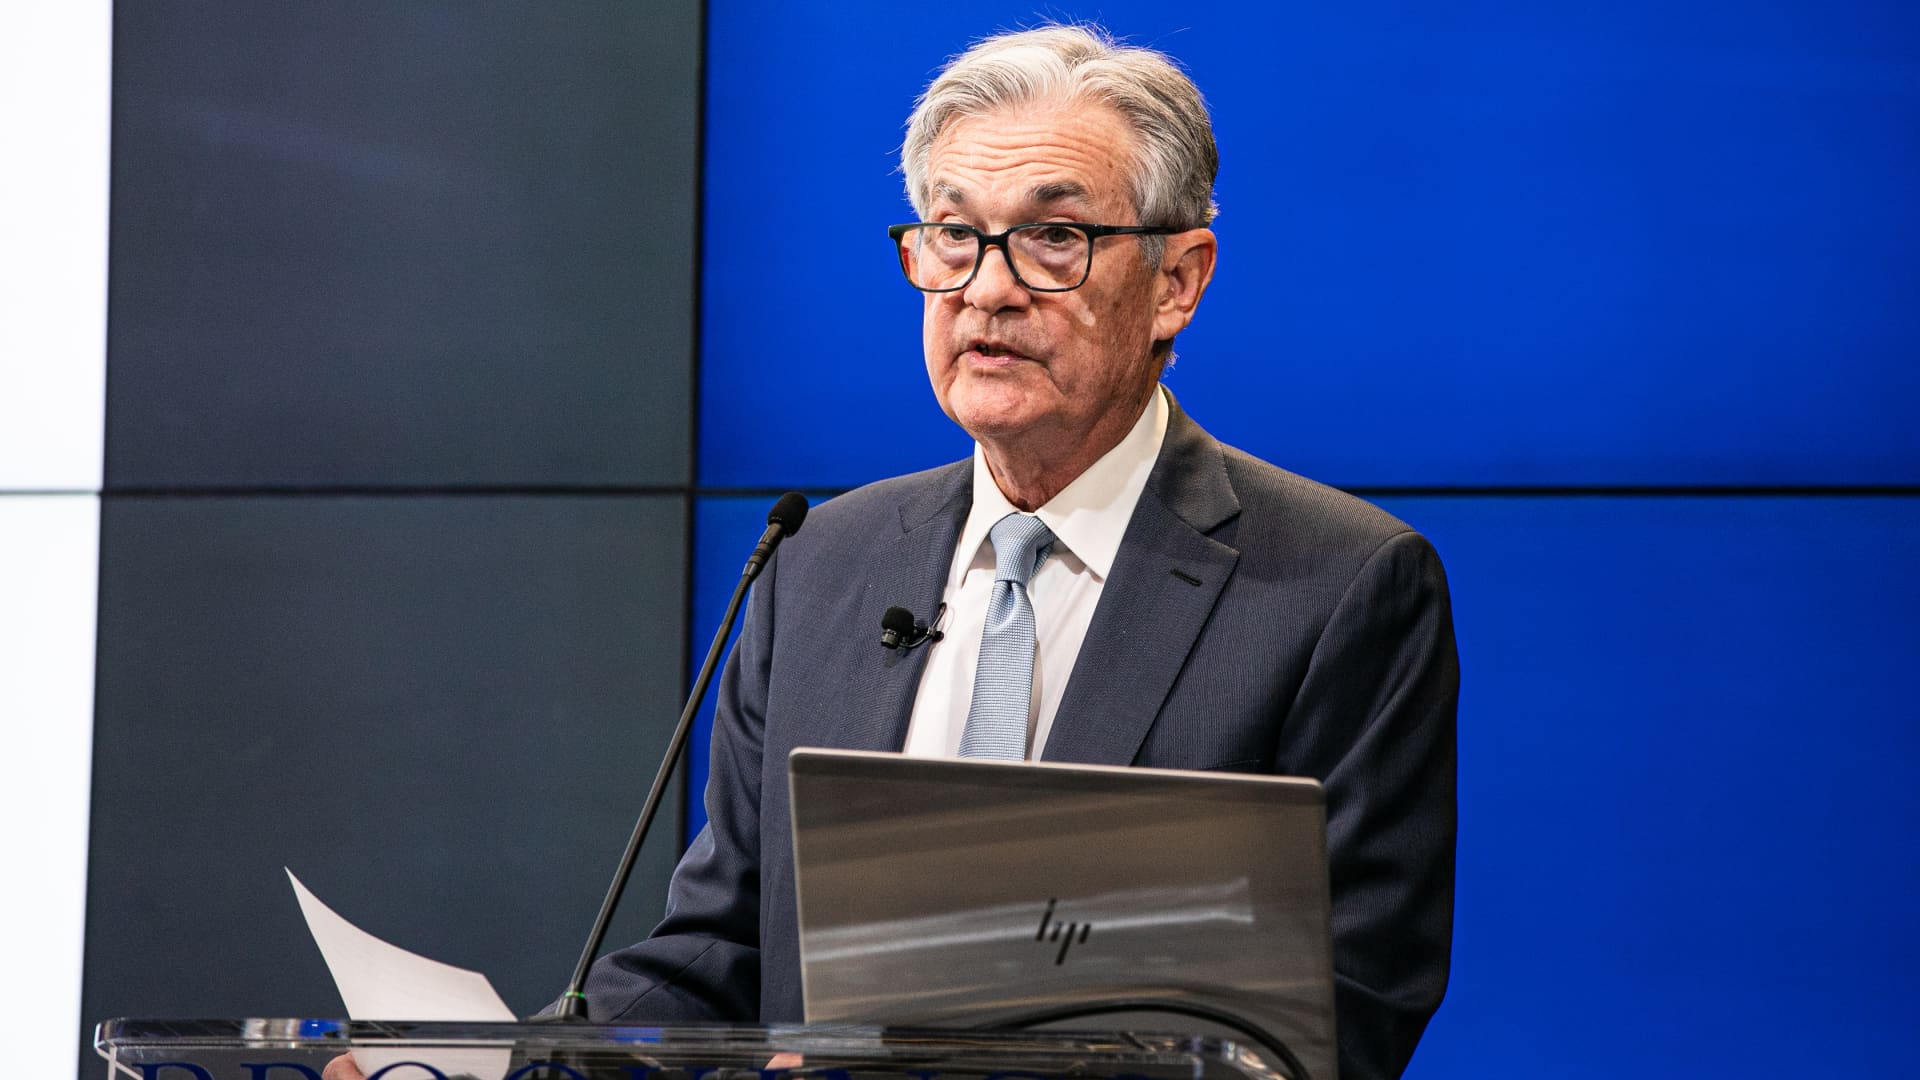 Jerome Powell, chairman of the US Federal Reserve, speaks at the Brookings Institution in Washington, DC, on Wednesday, Nov. 29, 2022.